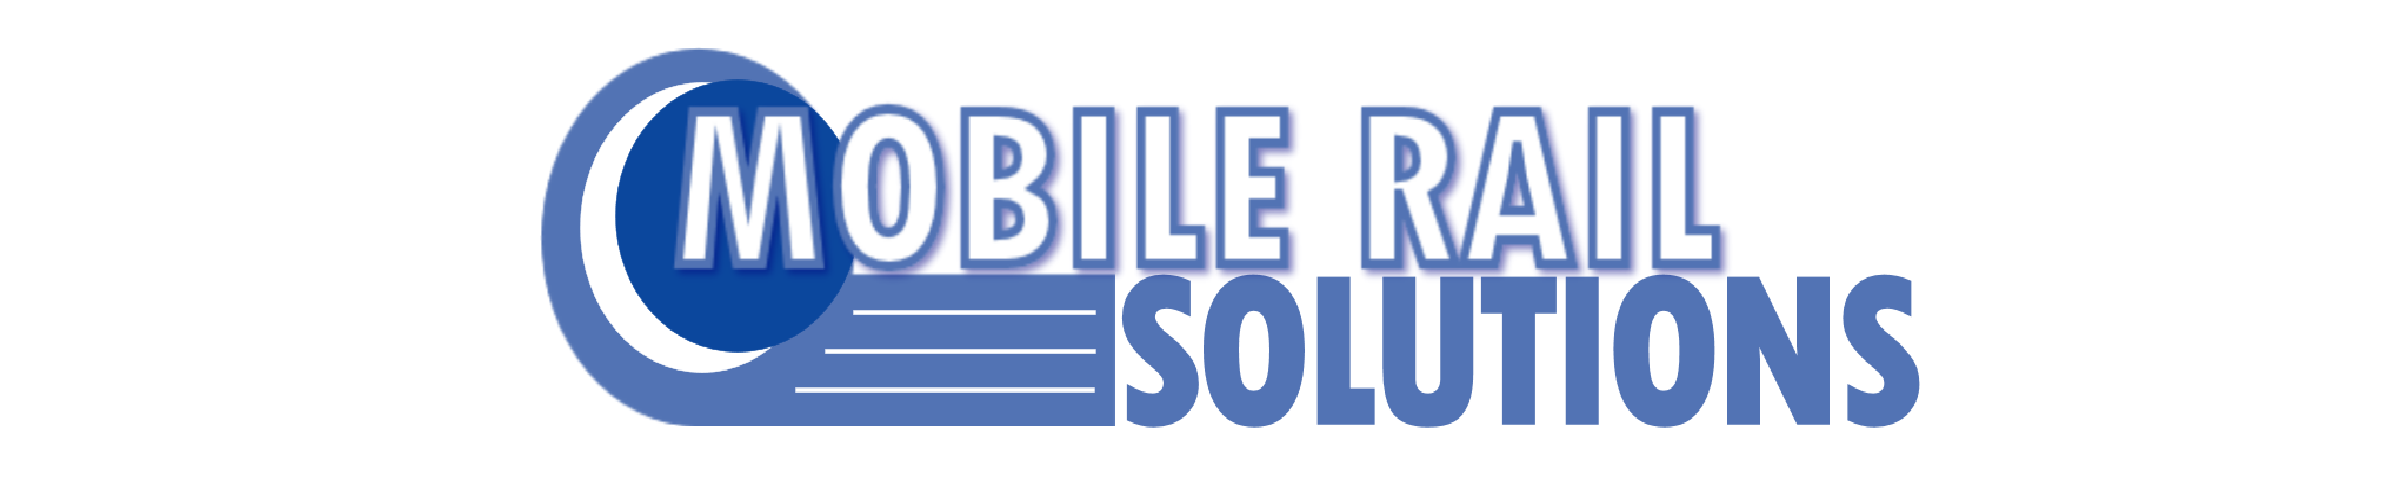 Mobile Rail Solutions